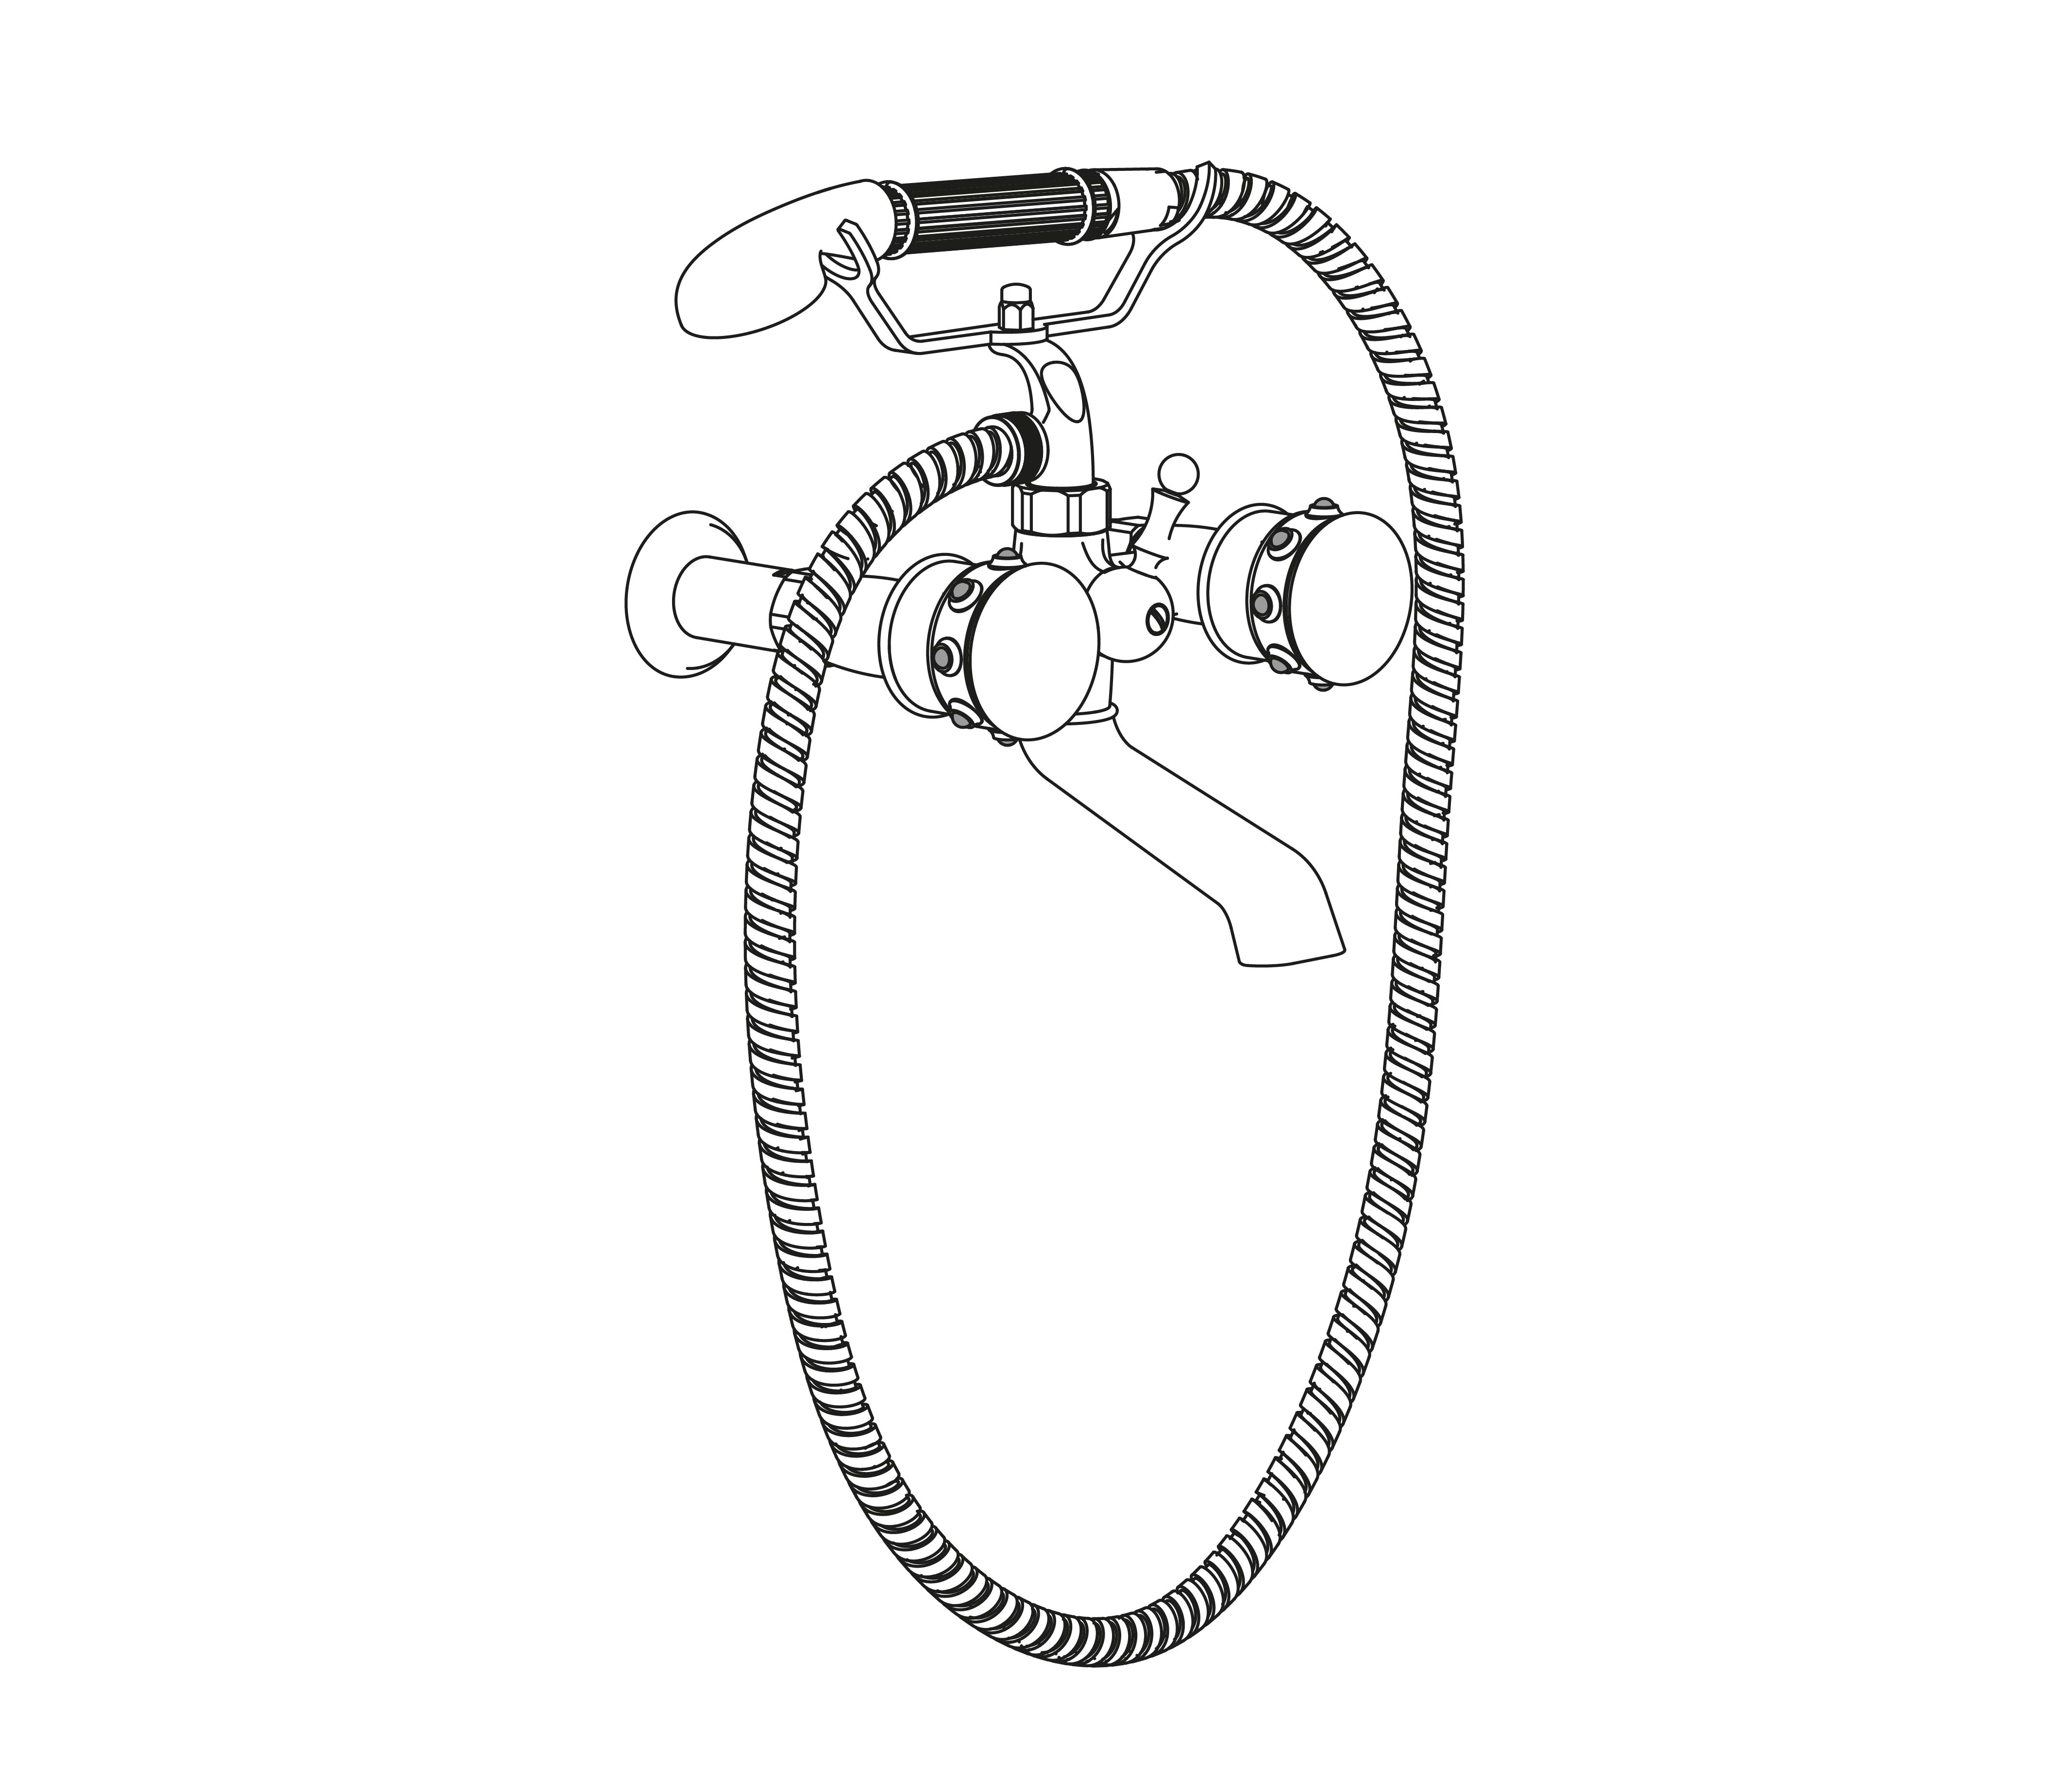 S169-3201 Wall mounted bath and shower mixer